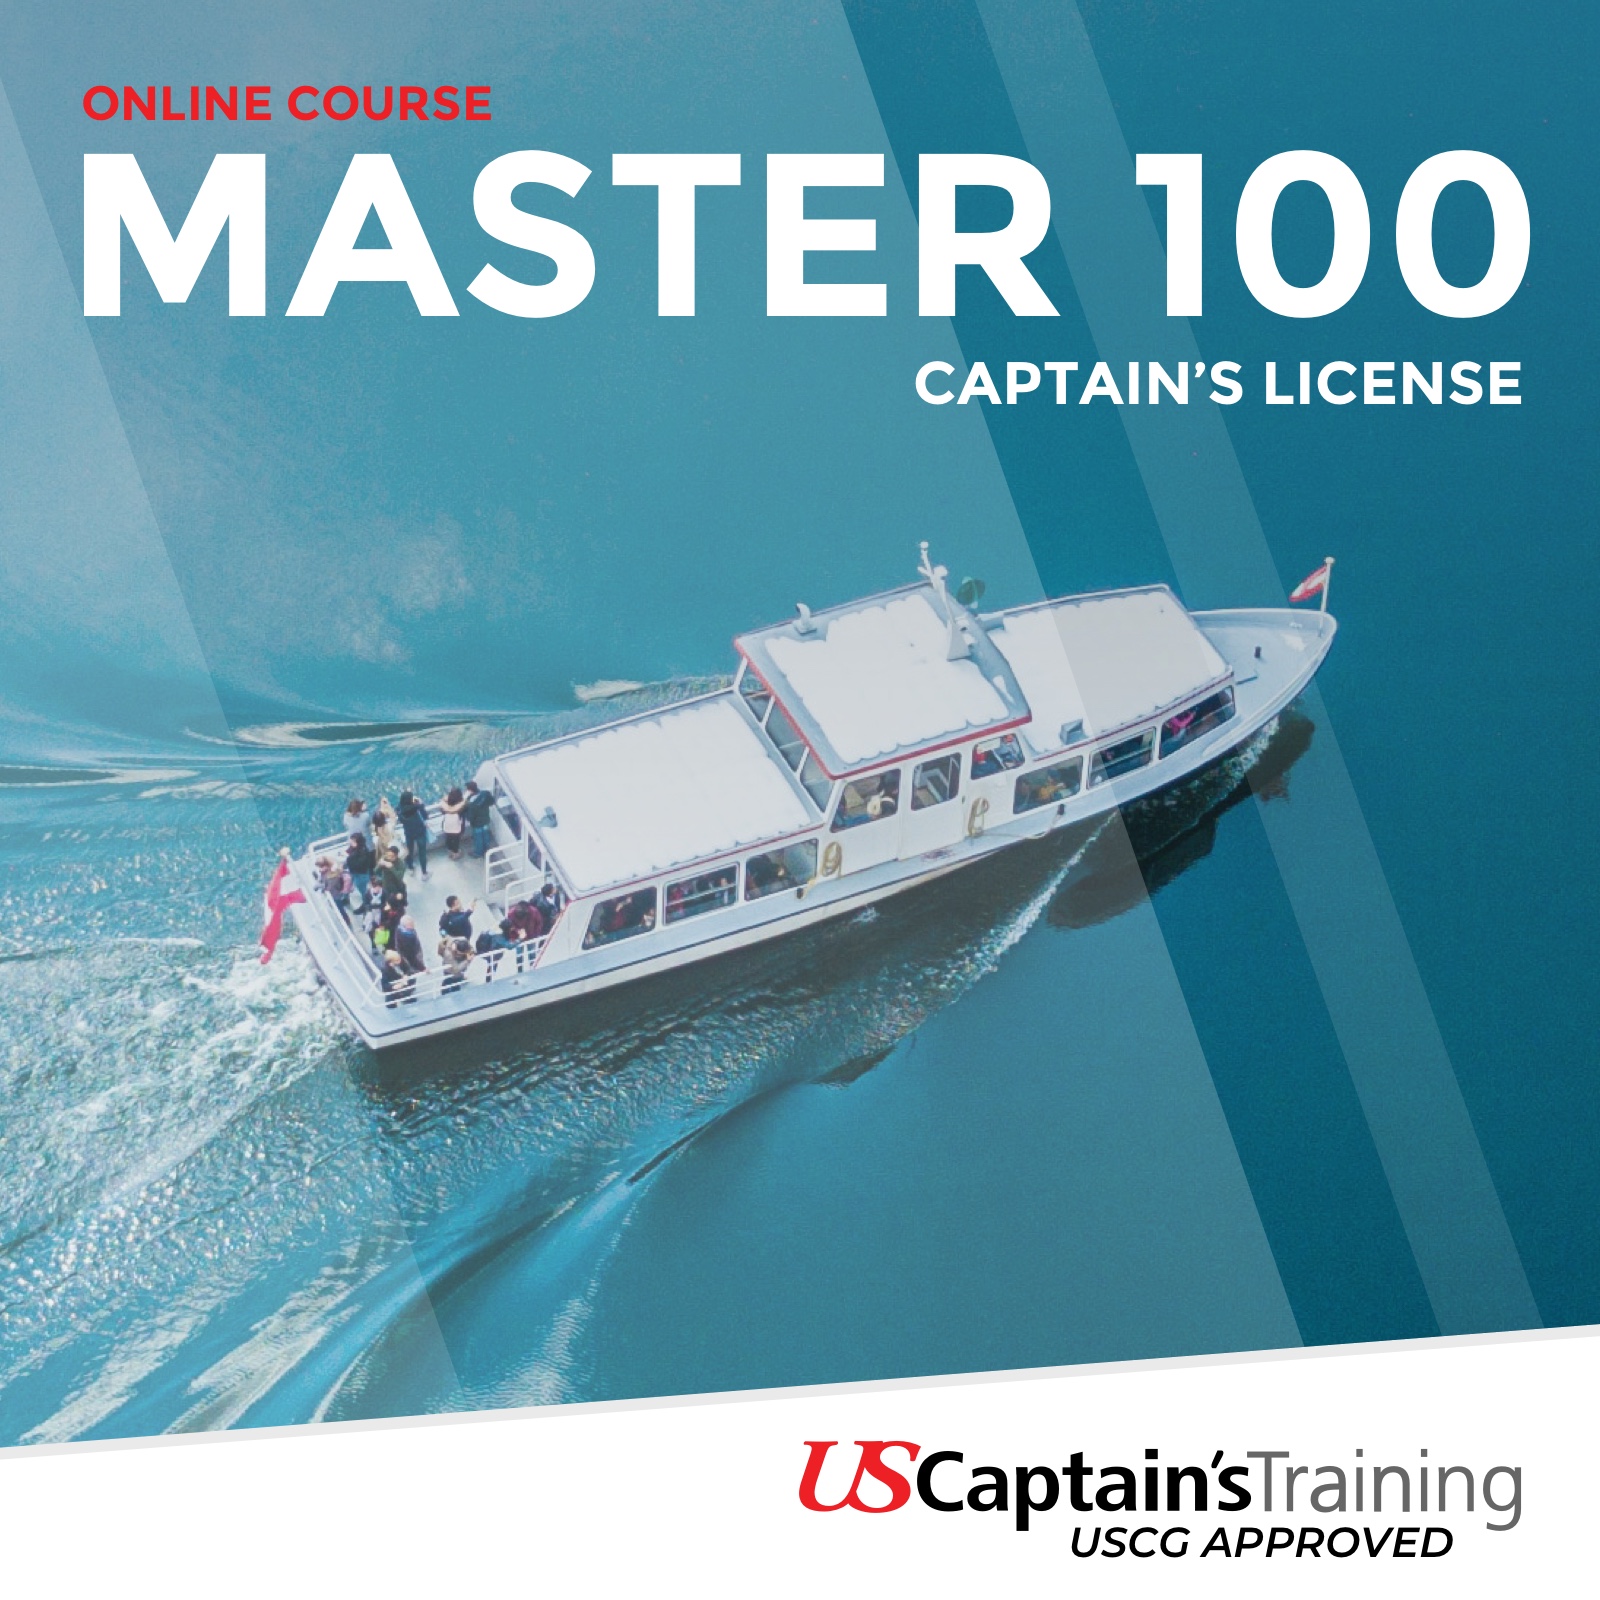 Captain's License Online Course & Exam from US Captain's Training - Master 100